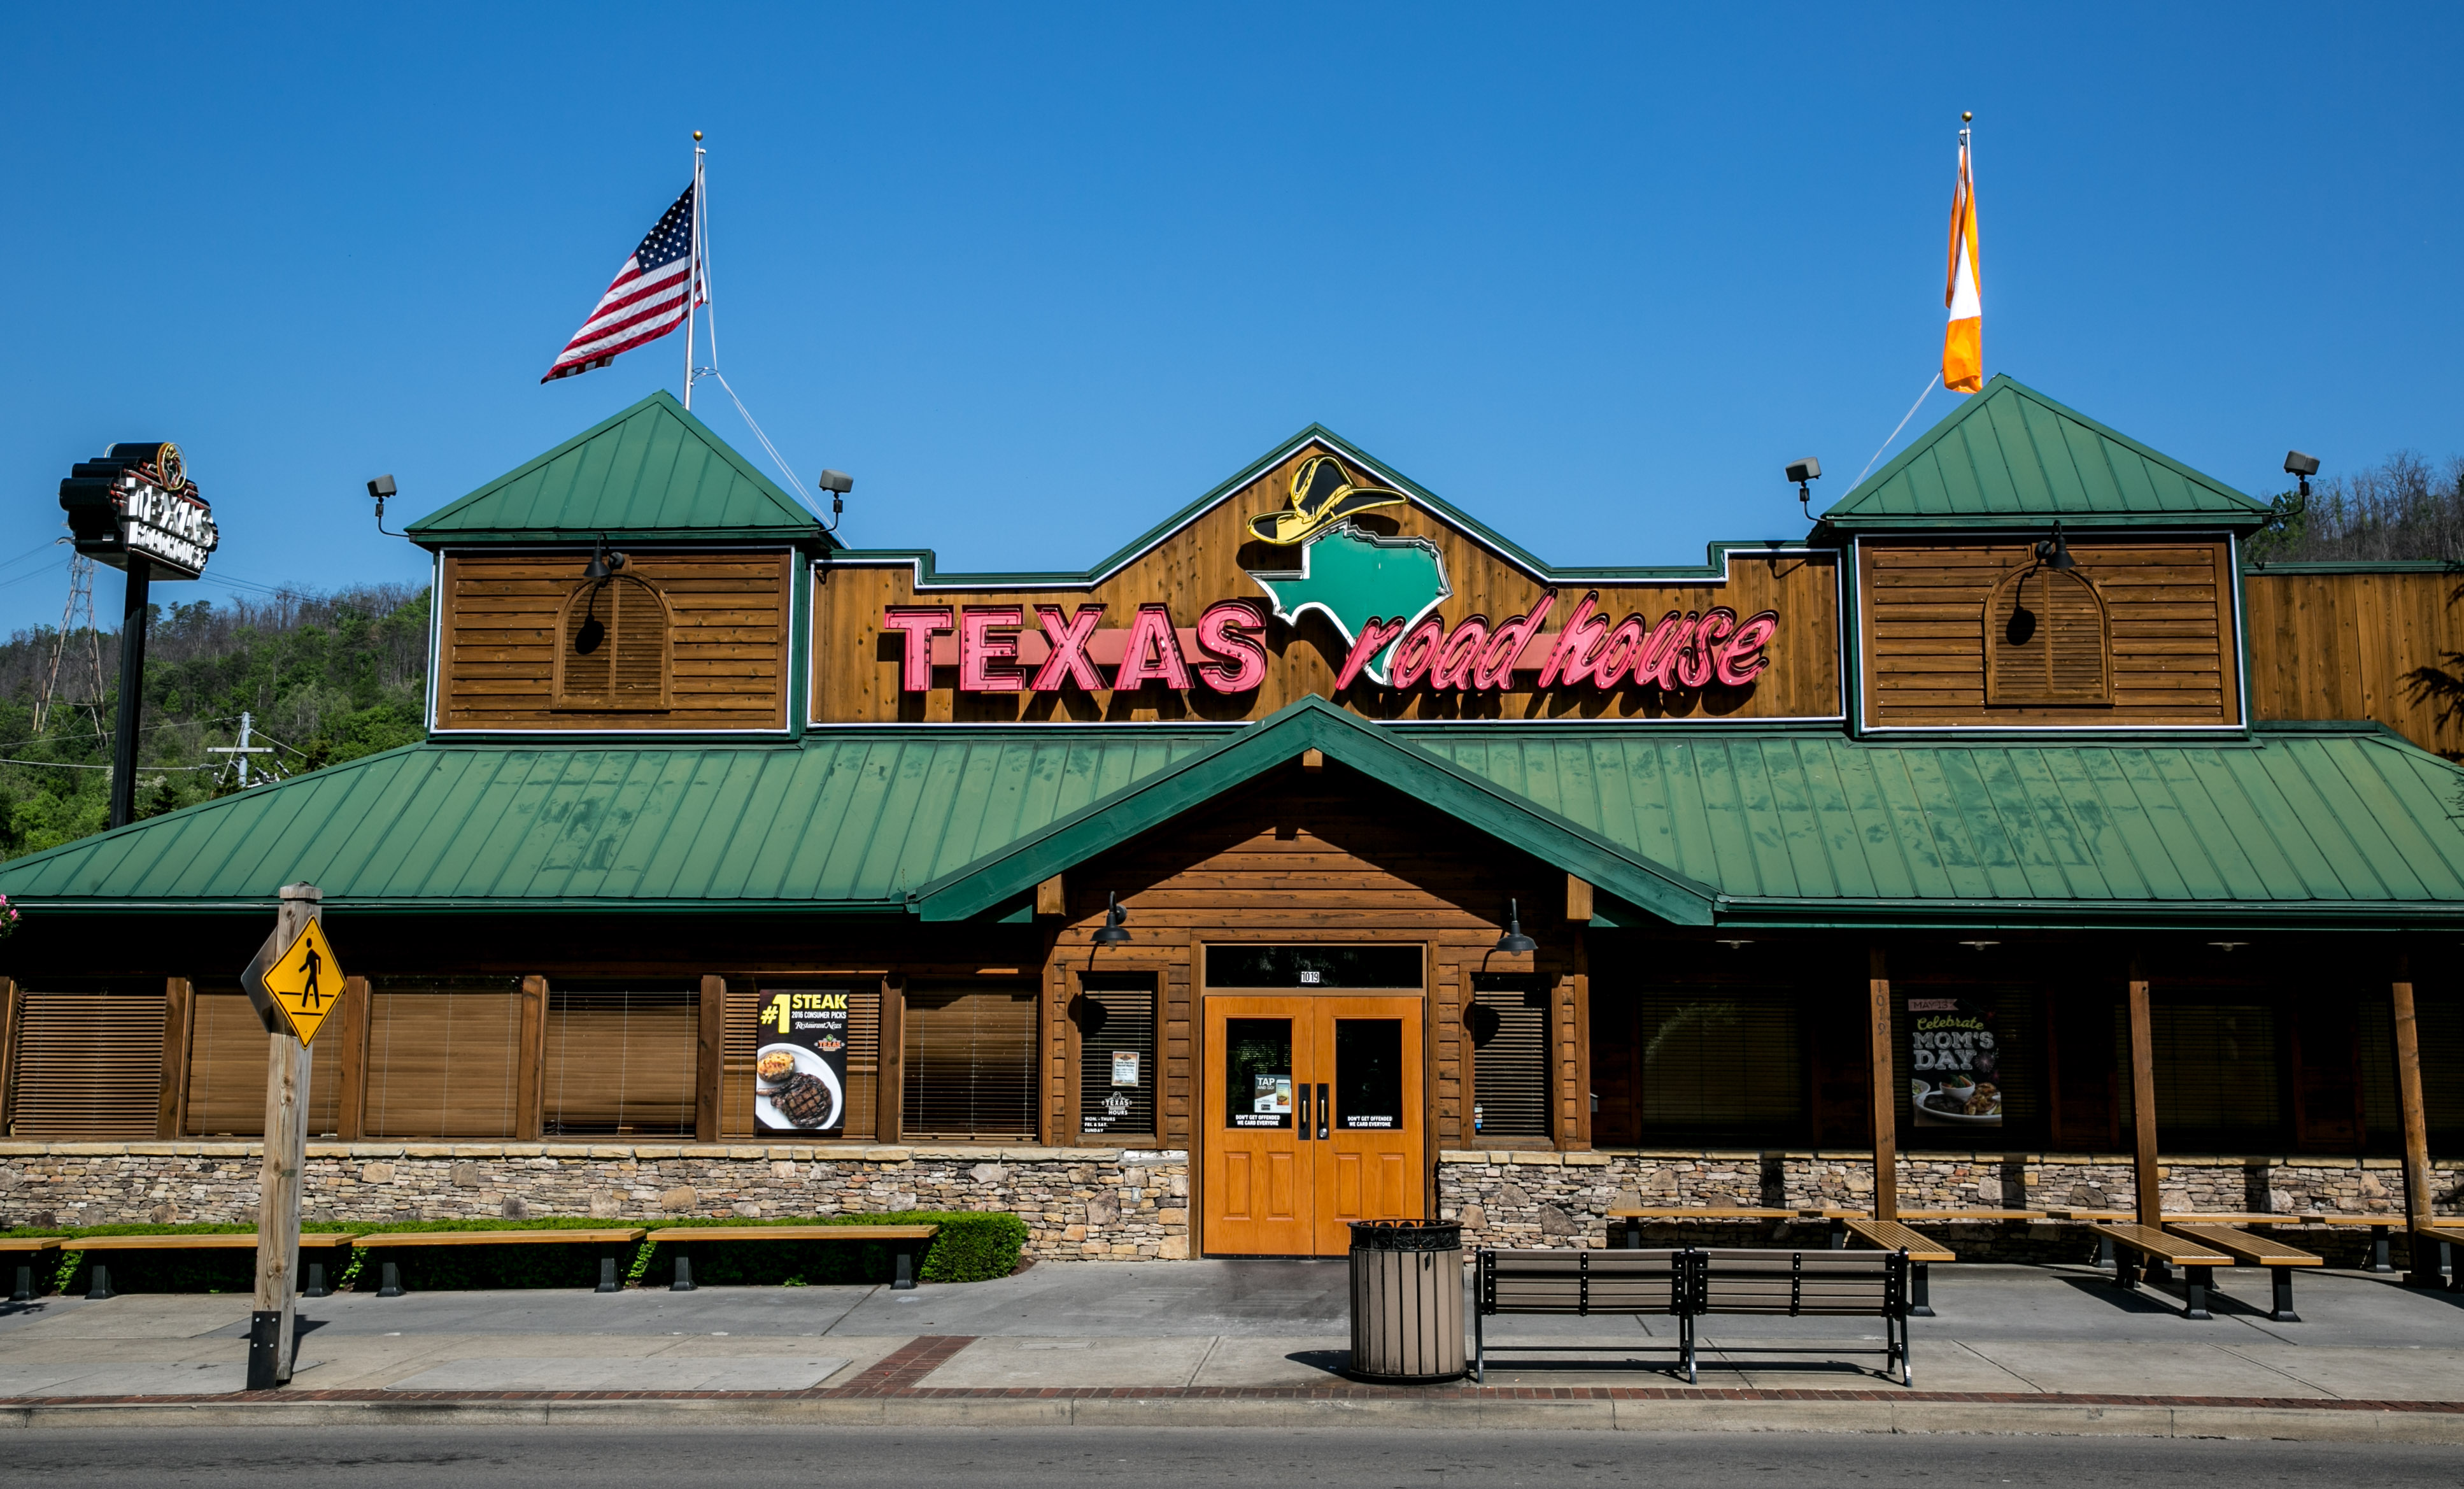 LongHorn Vs. Texas Roadhouse: I See Why the Younger Brand Is More Popular